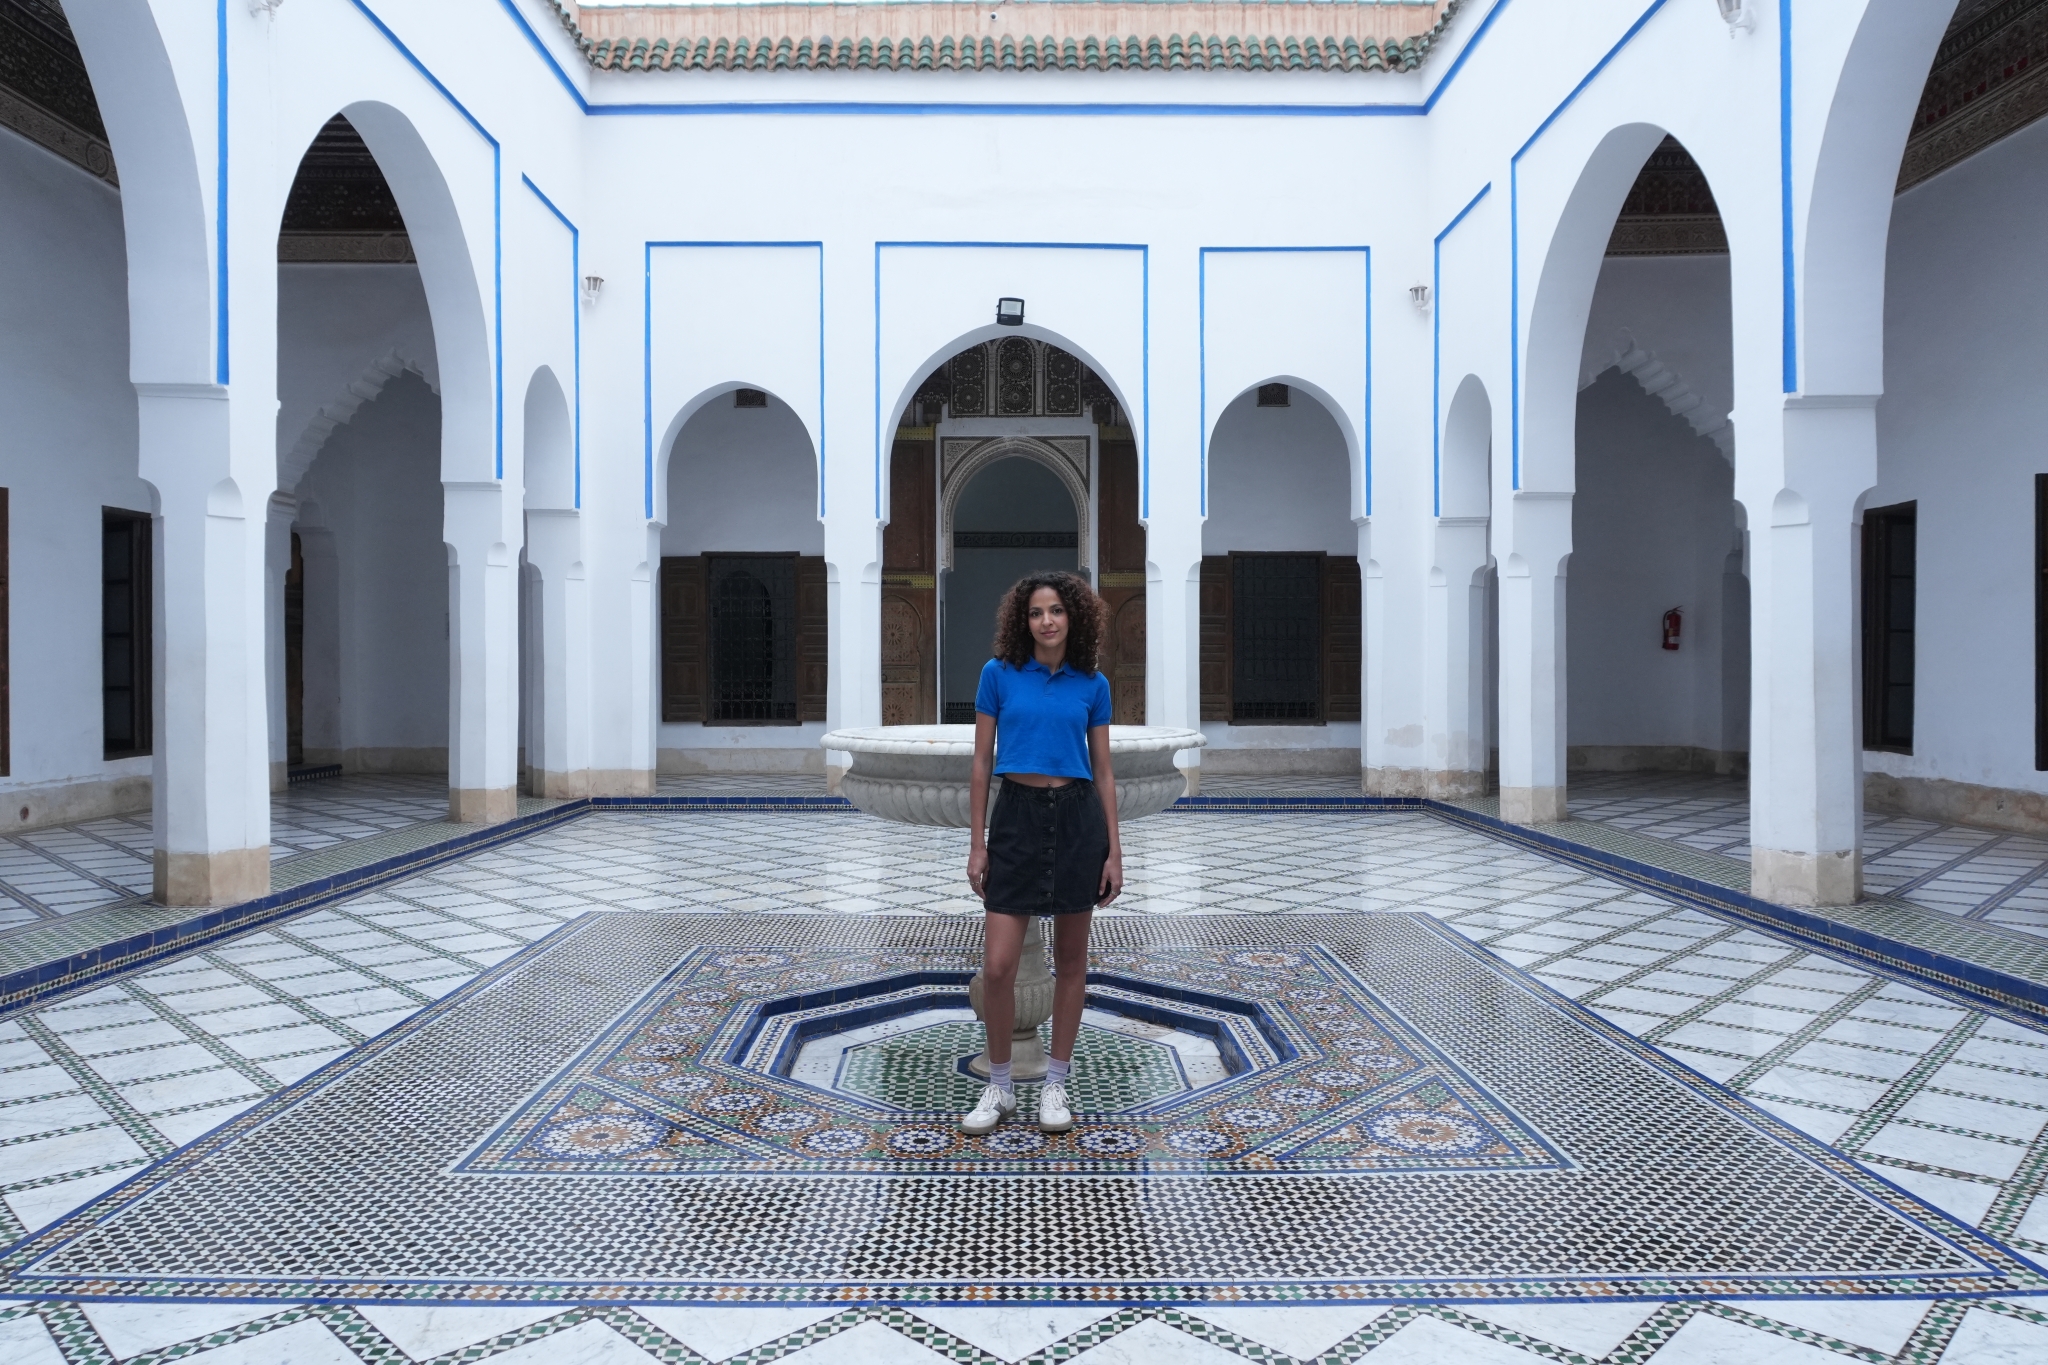 Sample image of a woman standing at the centre of a courtyard in a building, taken with a focal length of 16mm